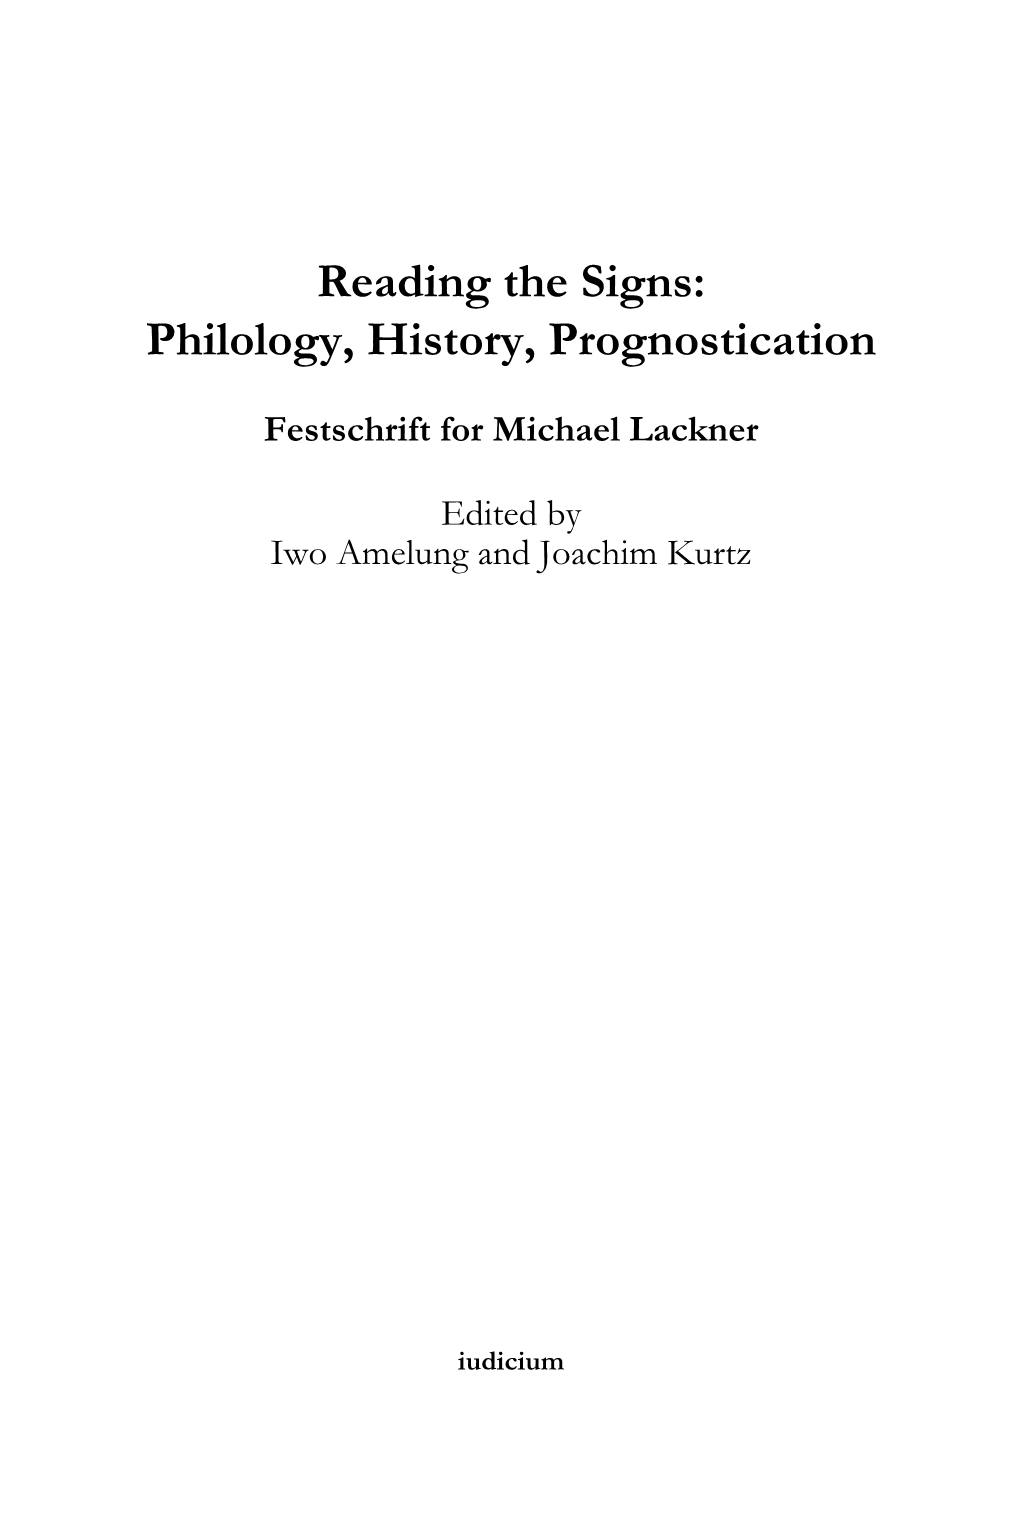 Reading the Signs: Philology, History, Prognostication